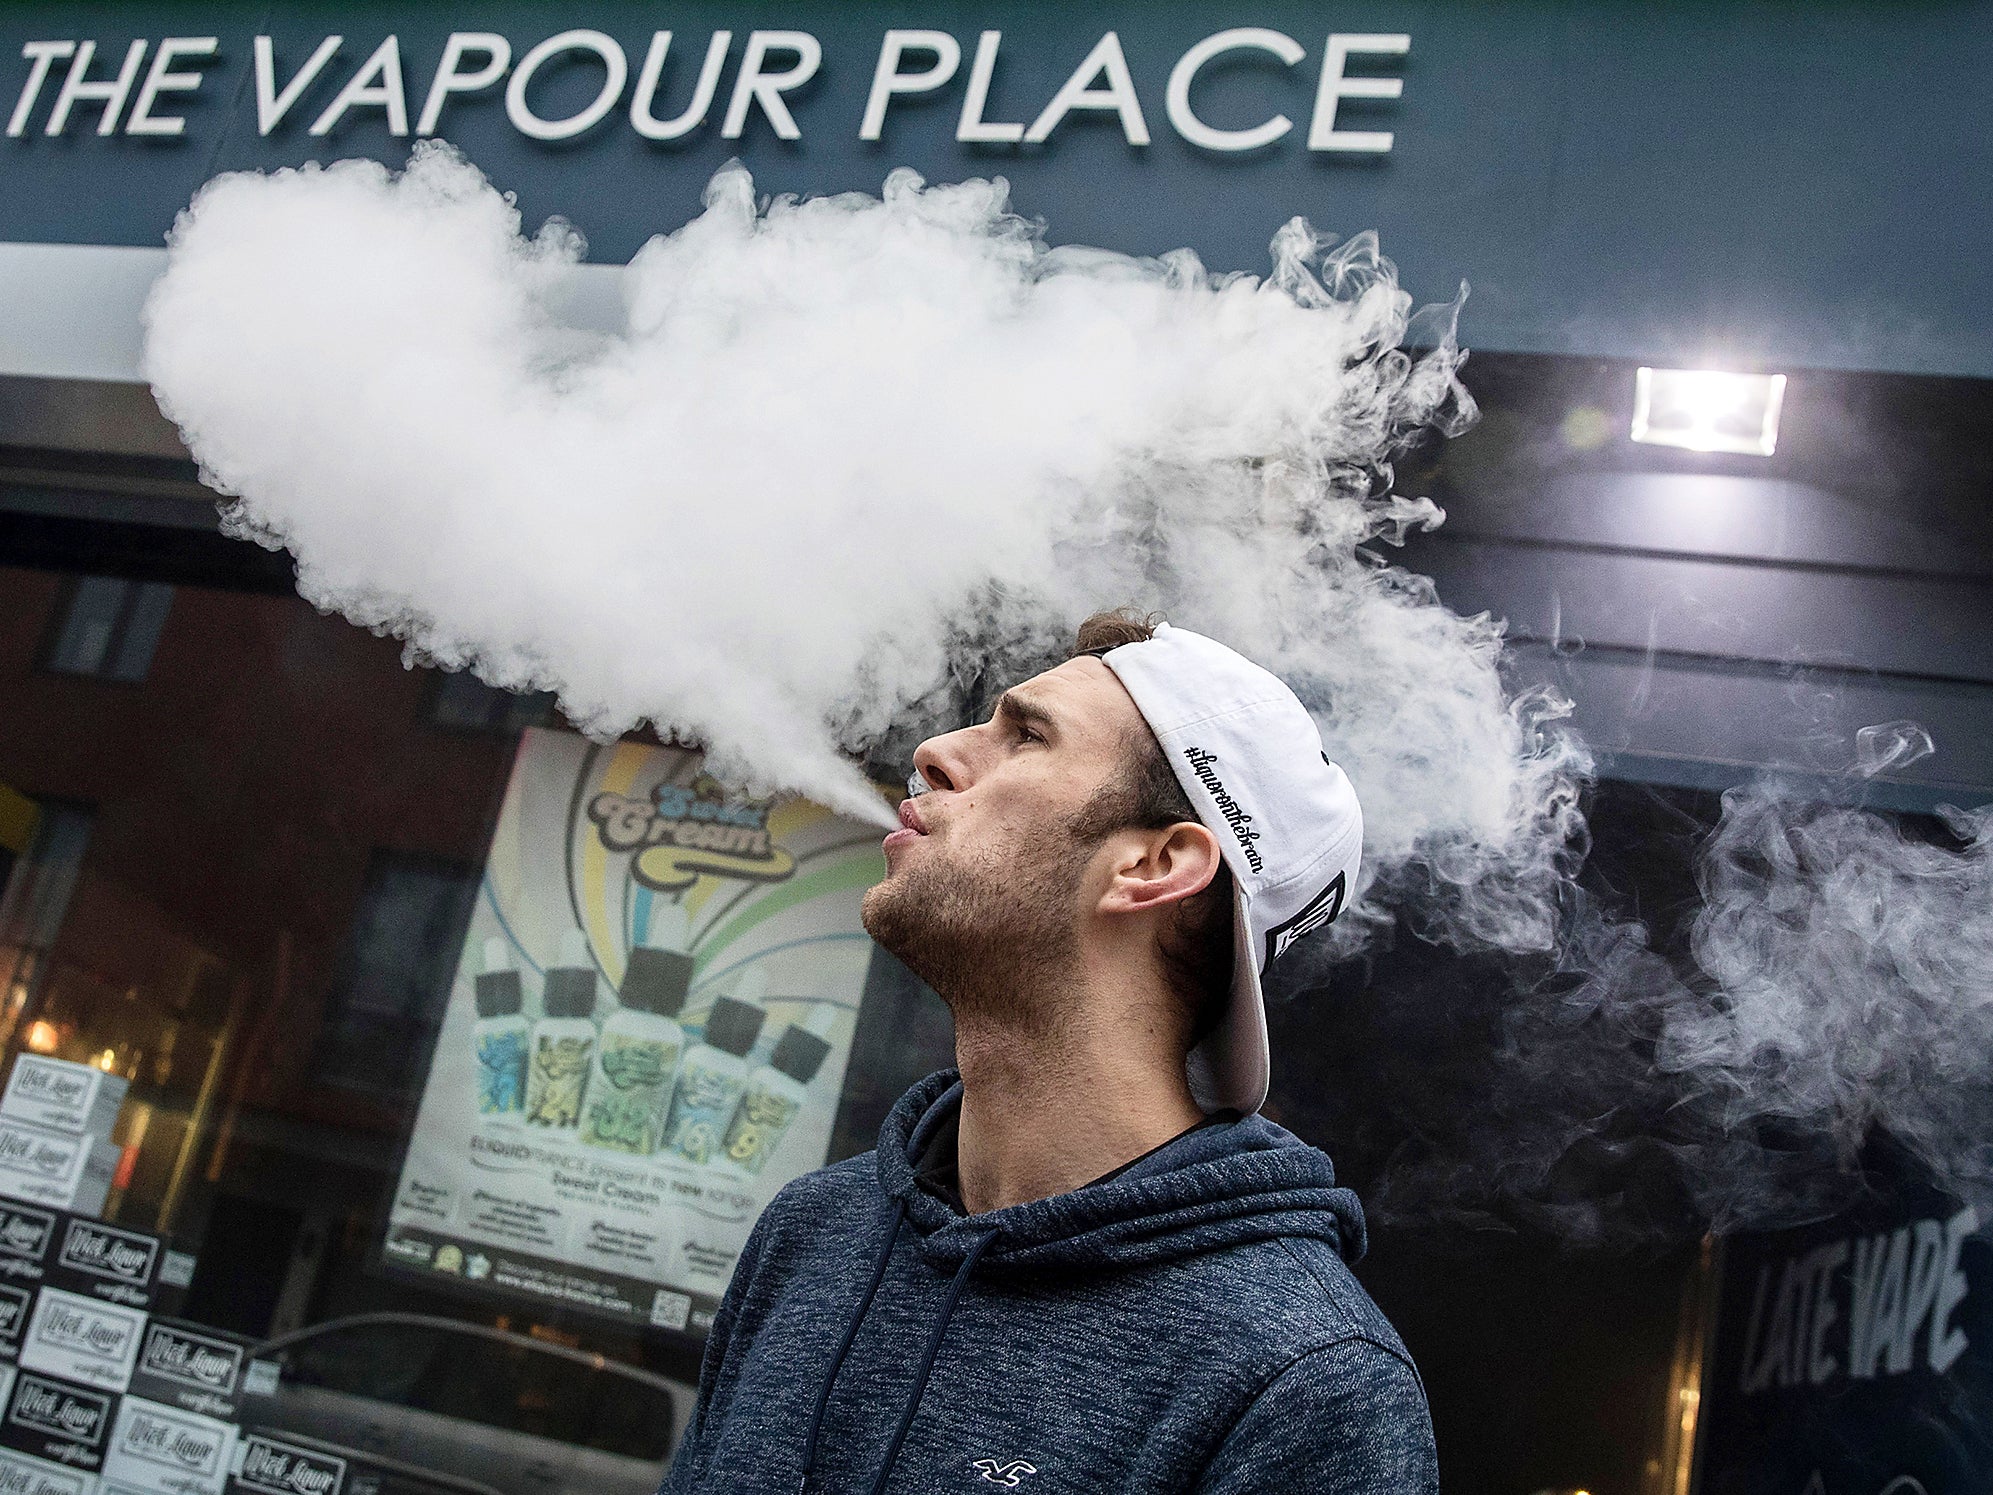 Young people have fallen ill in the US after vaping